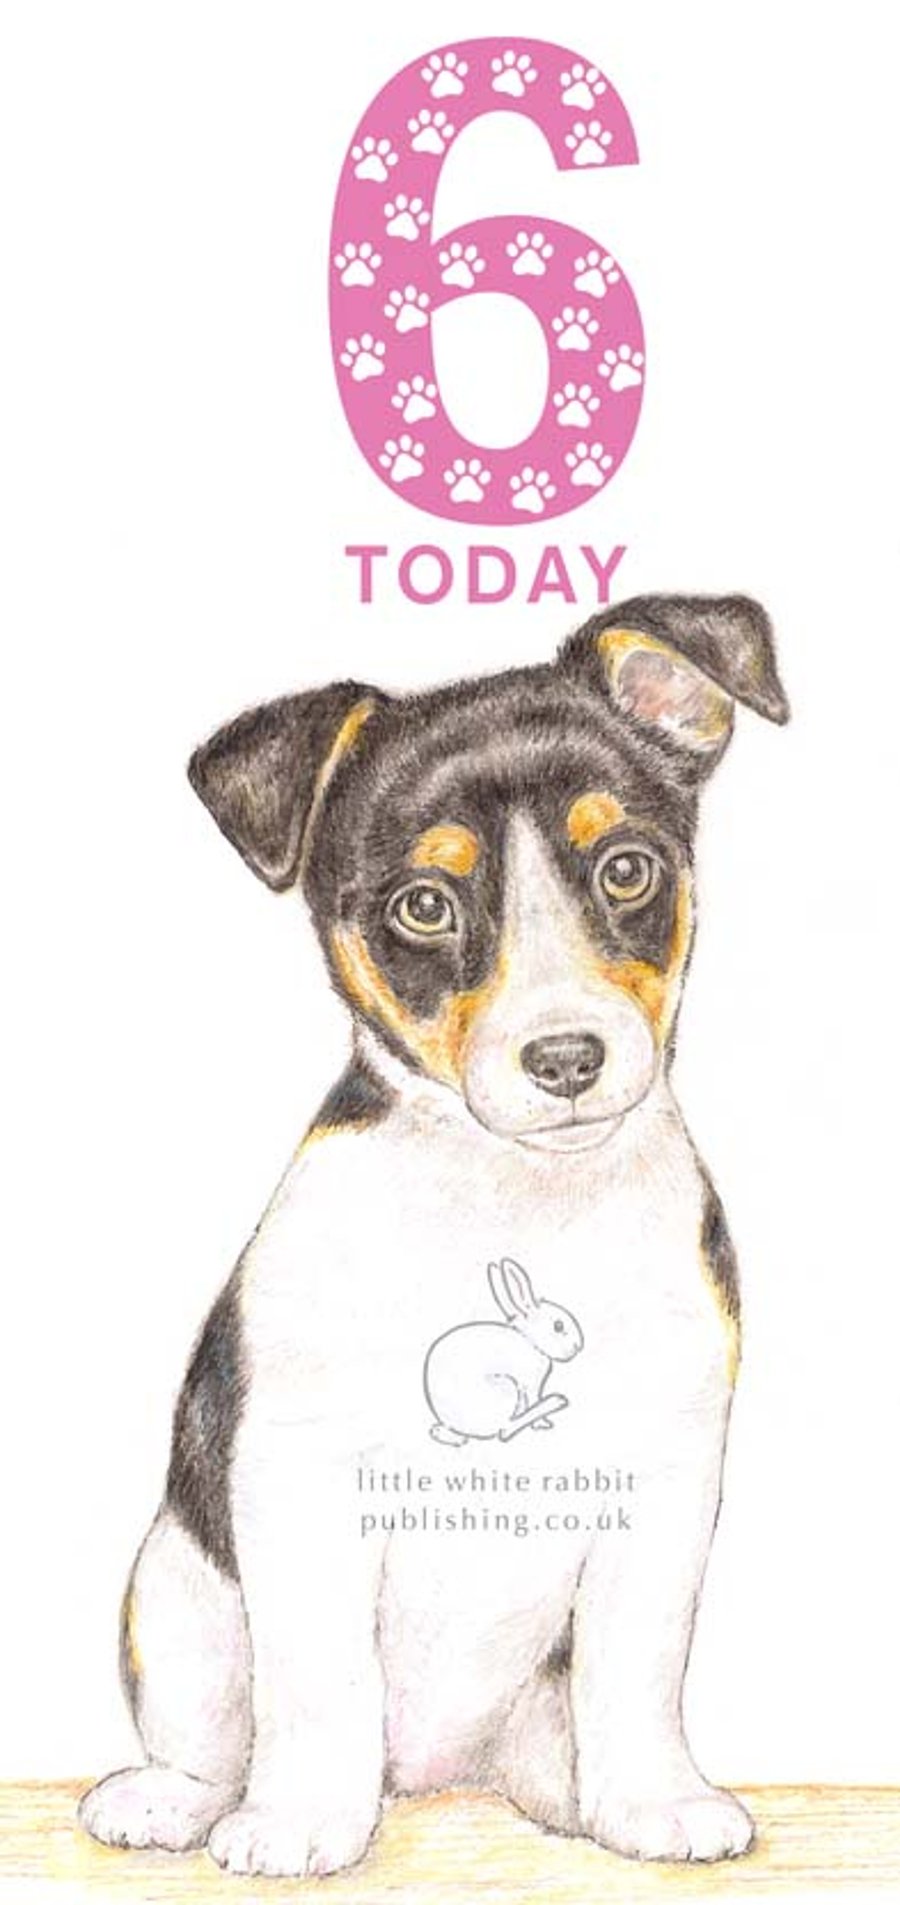 Jack the Jack Russell - 6 Today Card